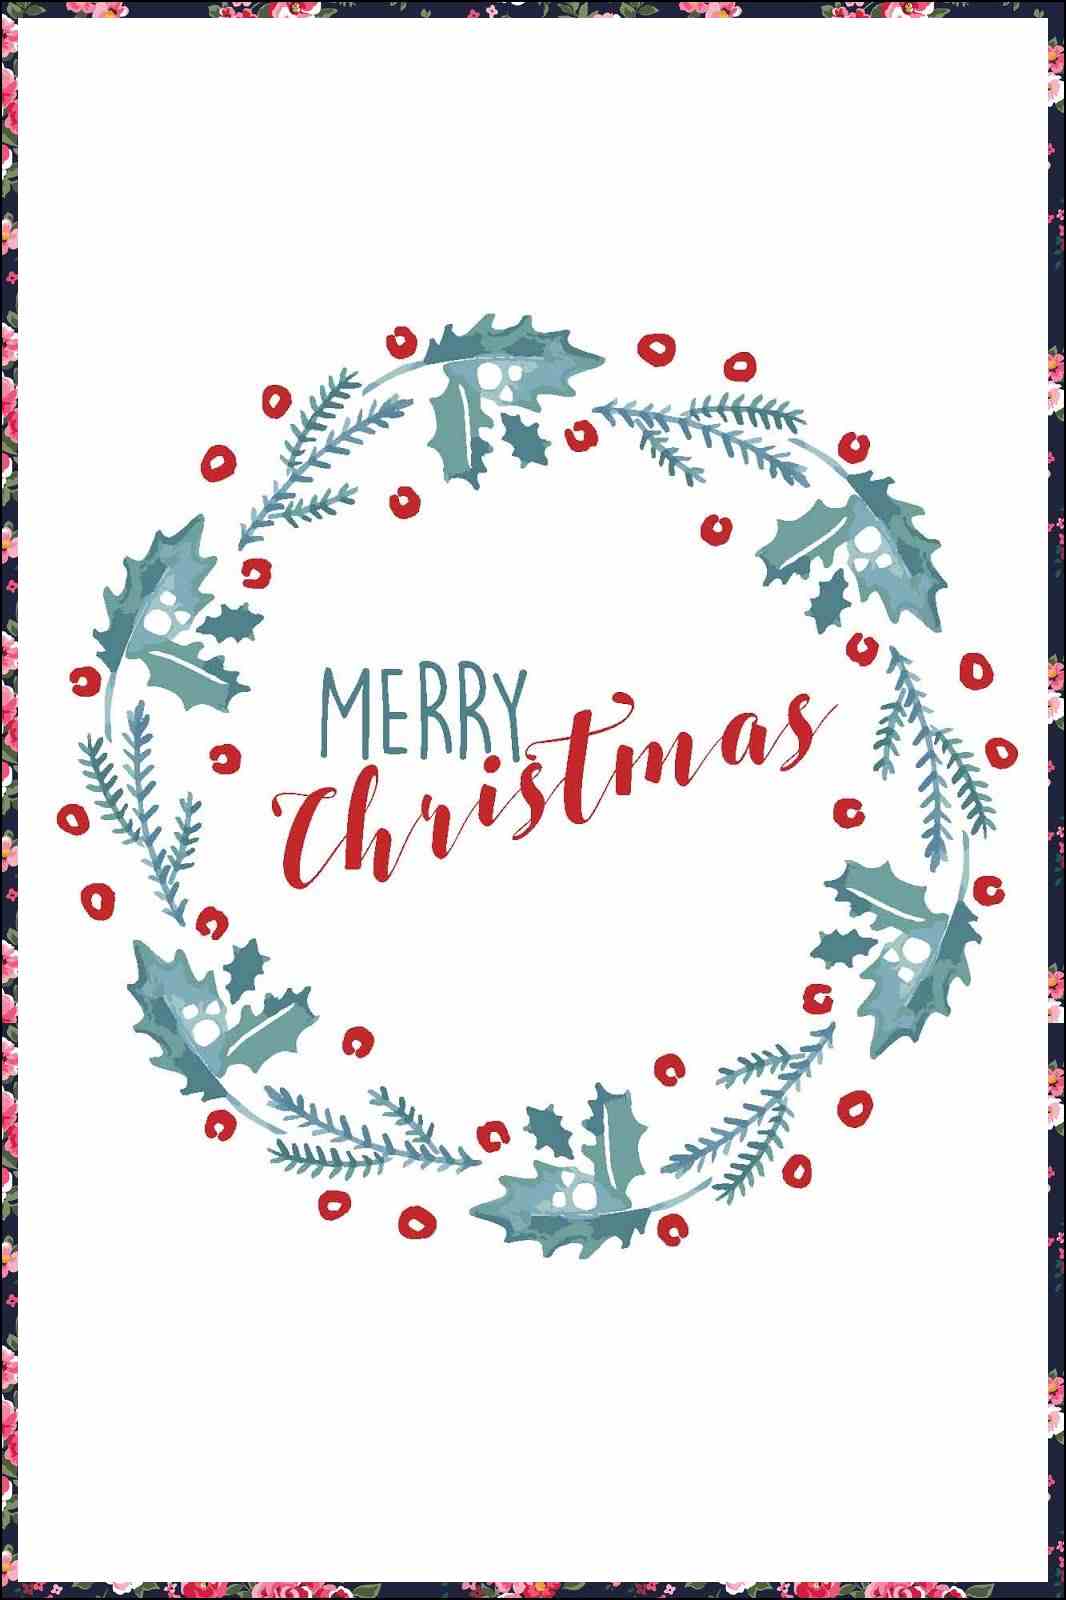 merry christmas images free
